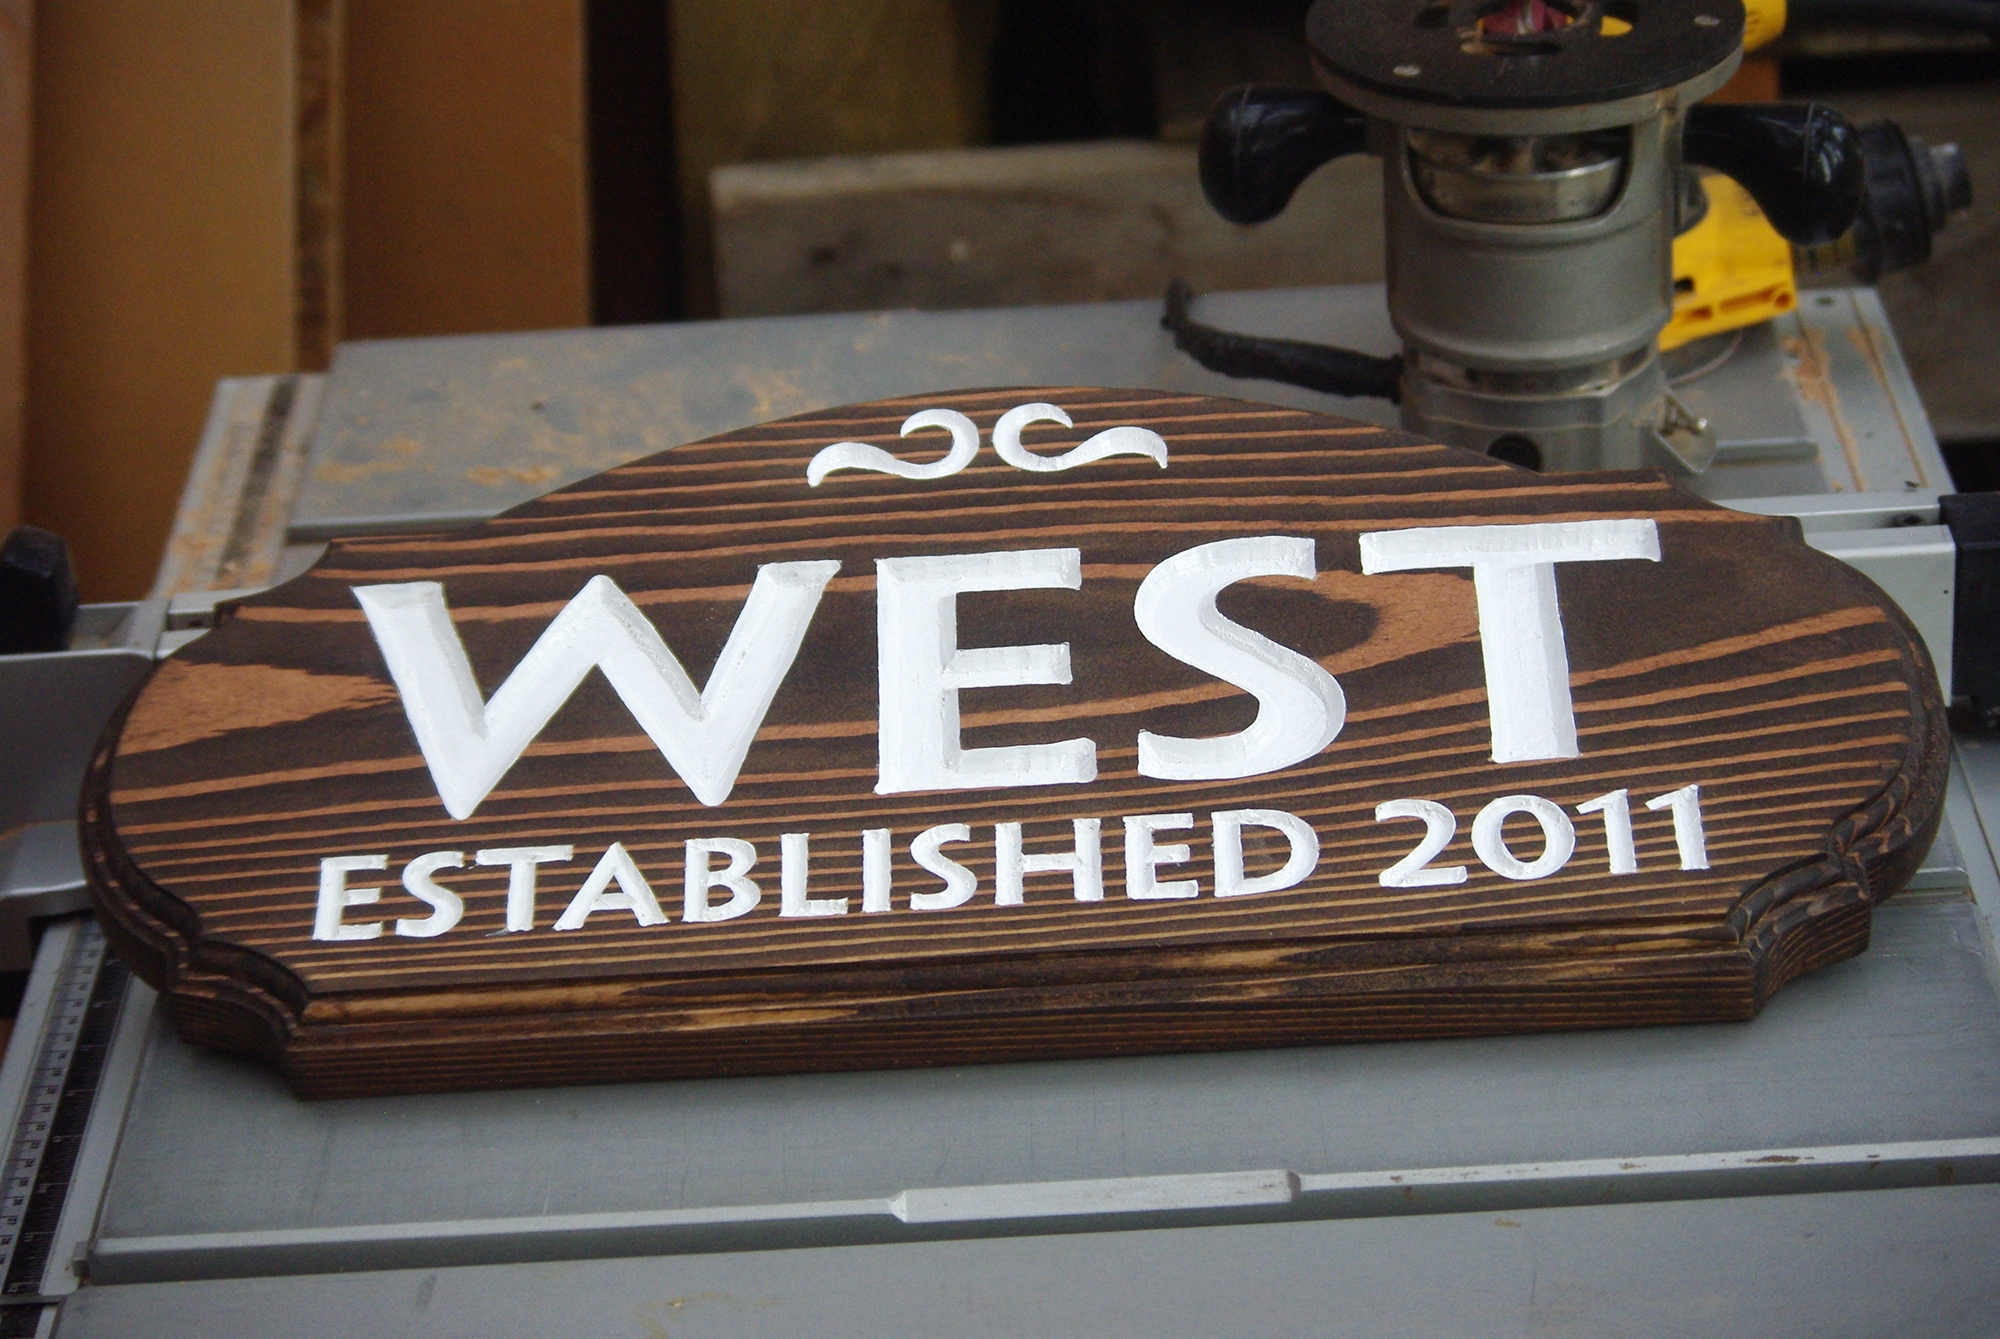 Wooden name sign with carved letters